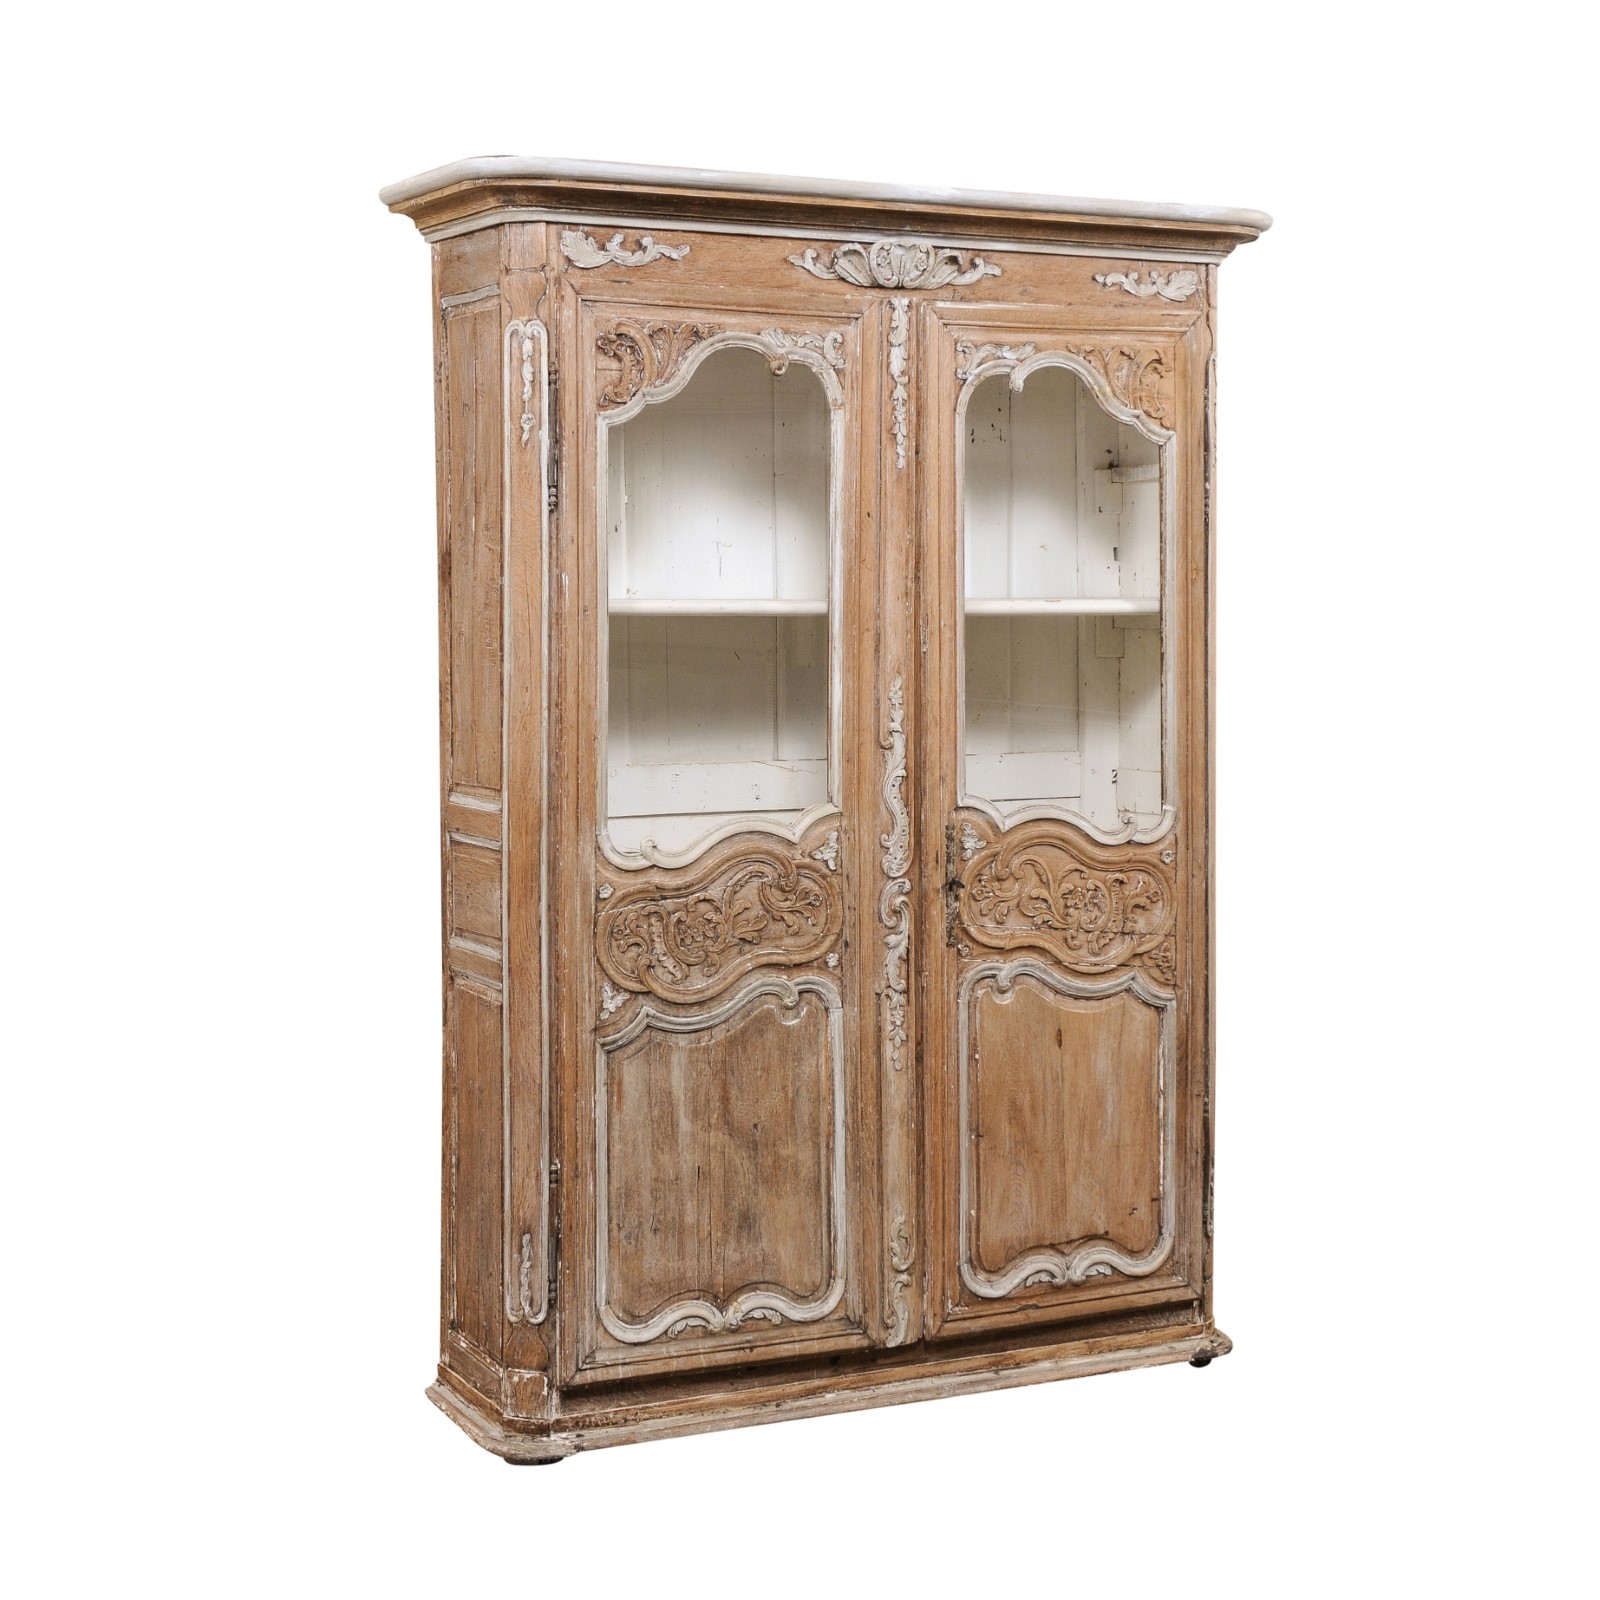 Elegant French Antique Tall Display Cabinet